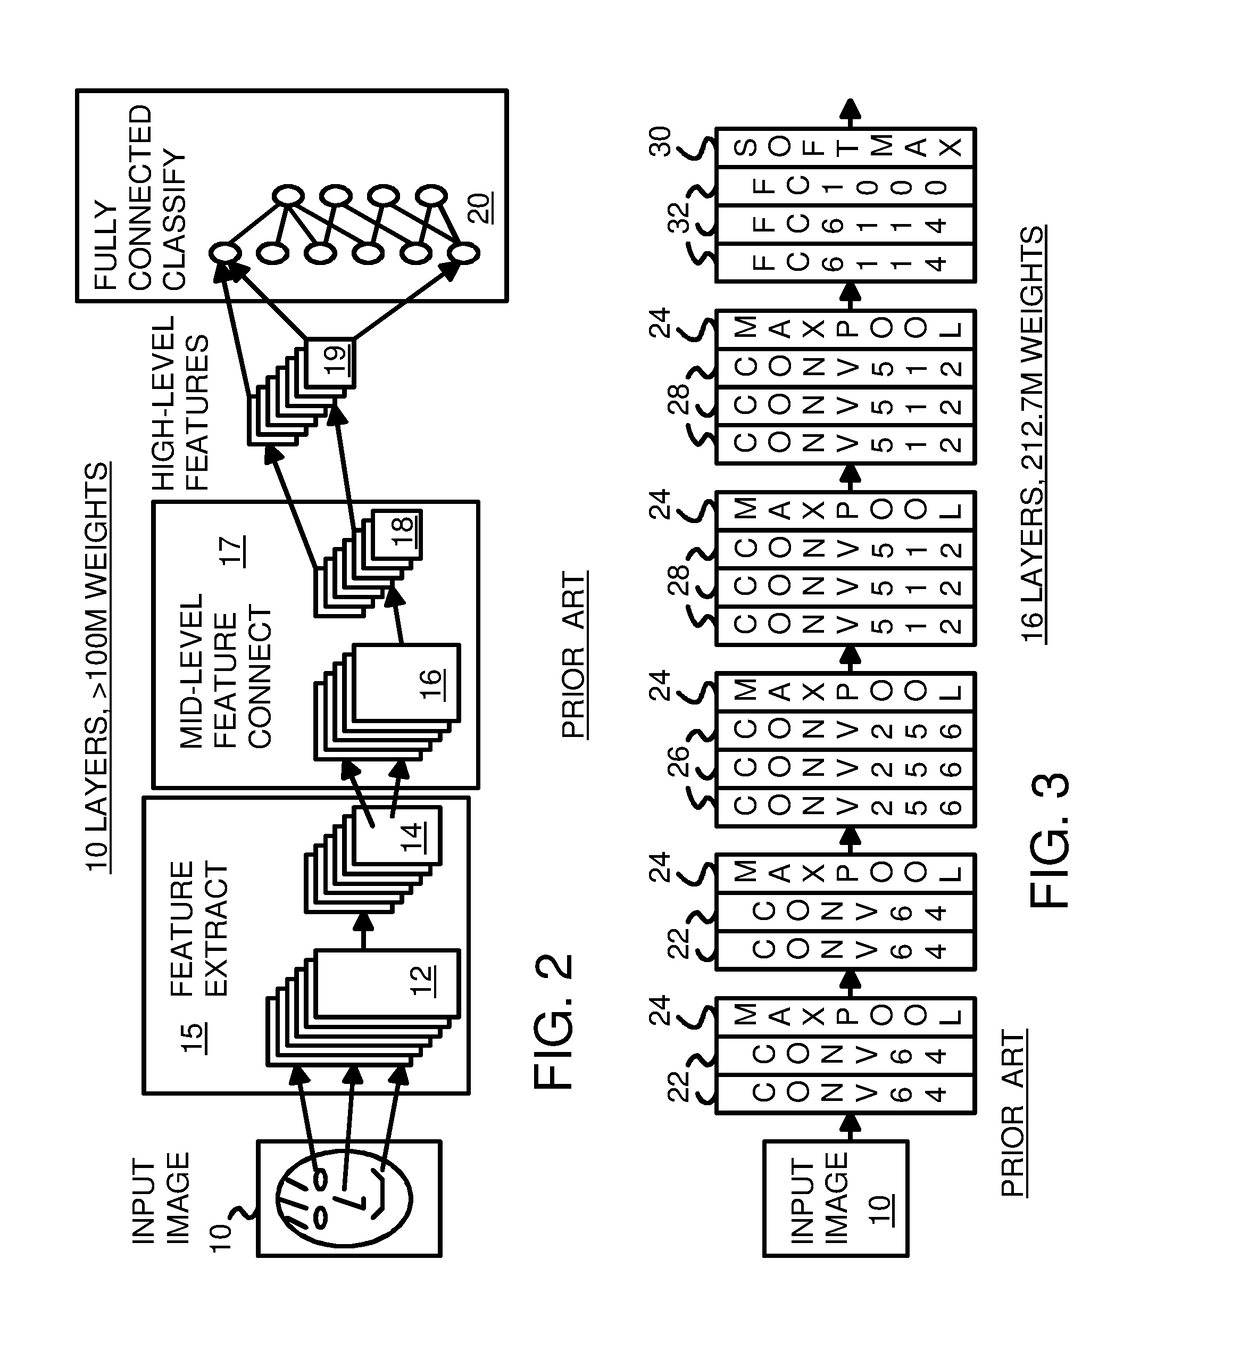 Method and System for Bit-Depth Reduction in Artificial Neural Networks